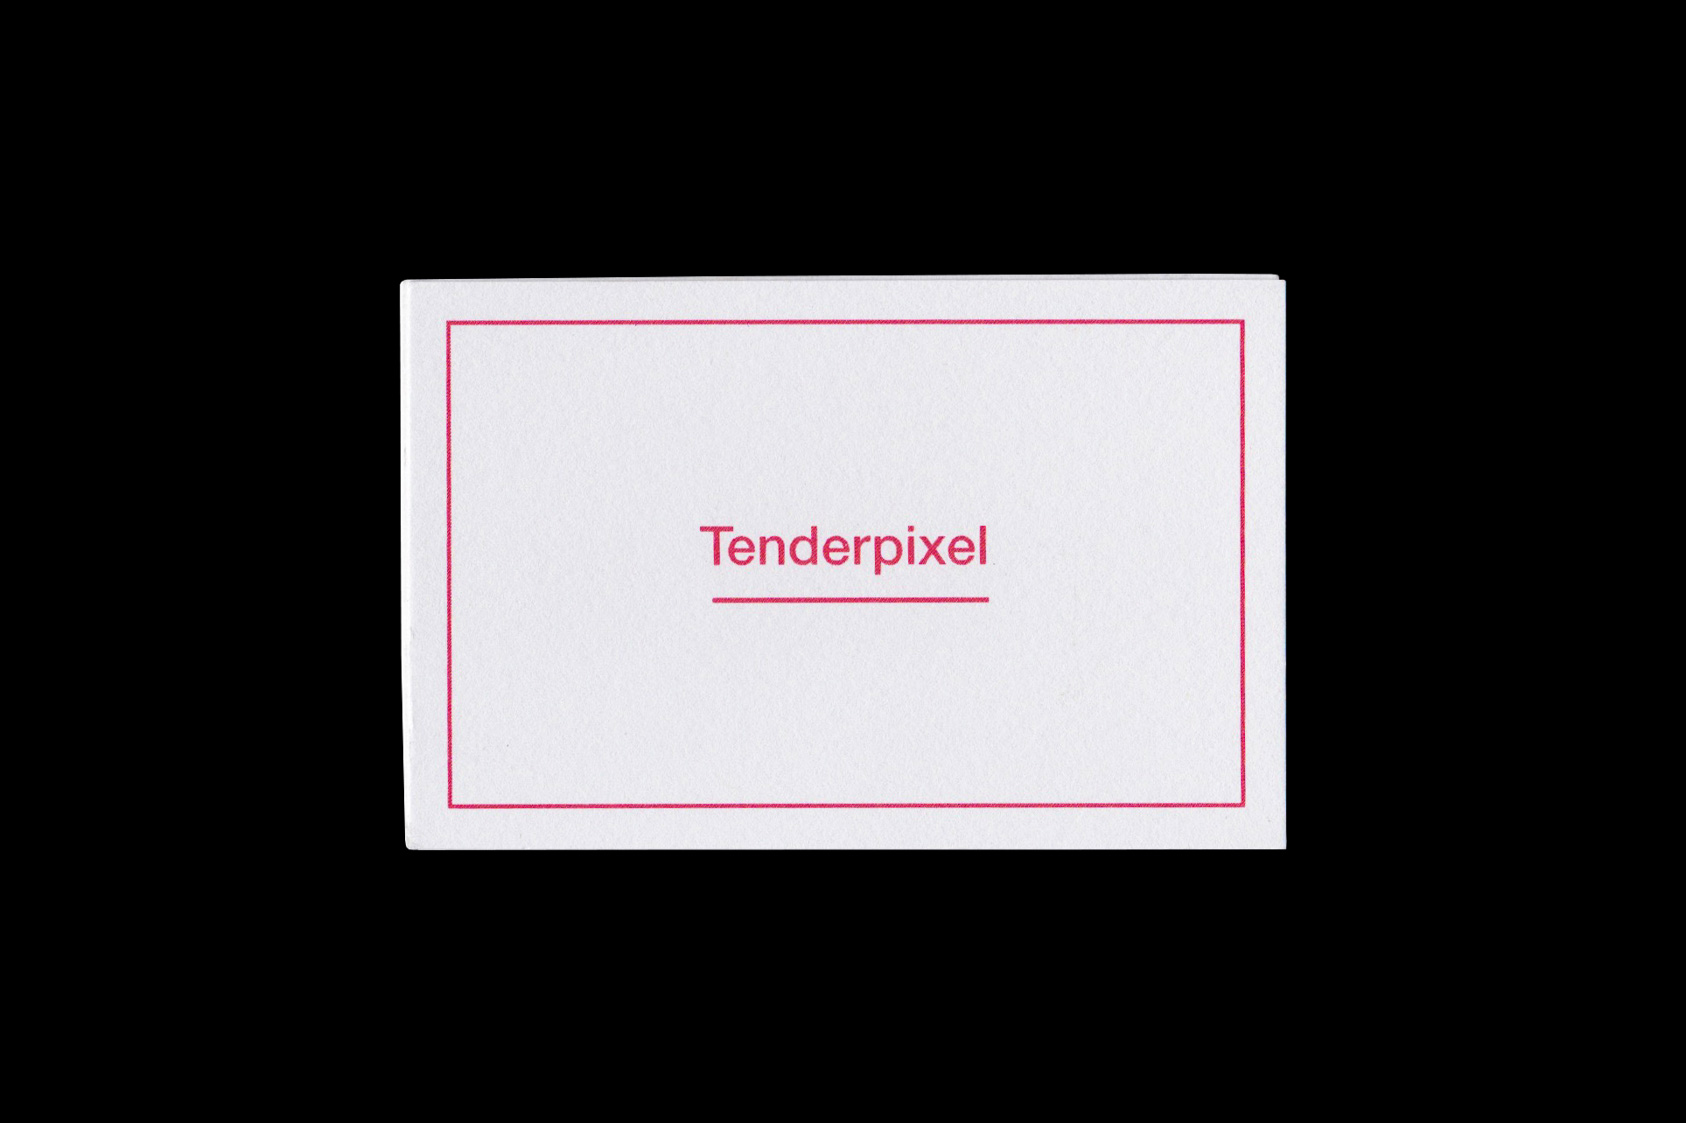 Tenderpixel Identity by the agency for emerging ideas